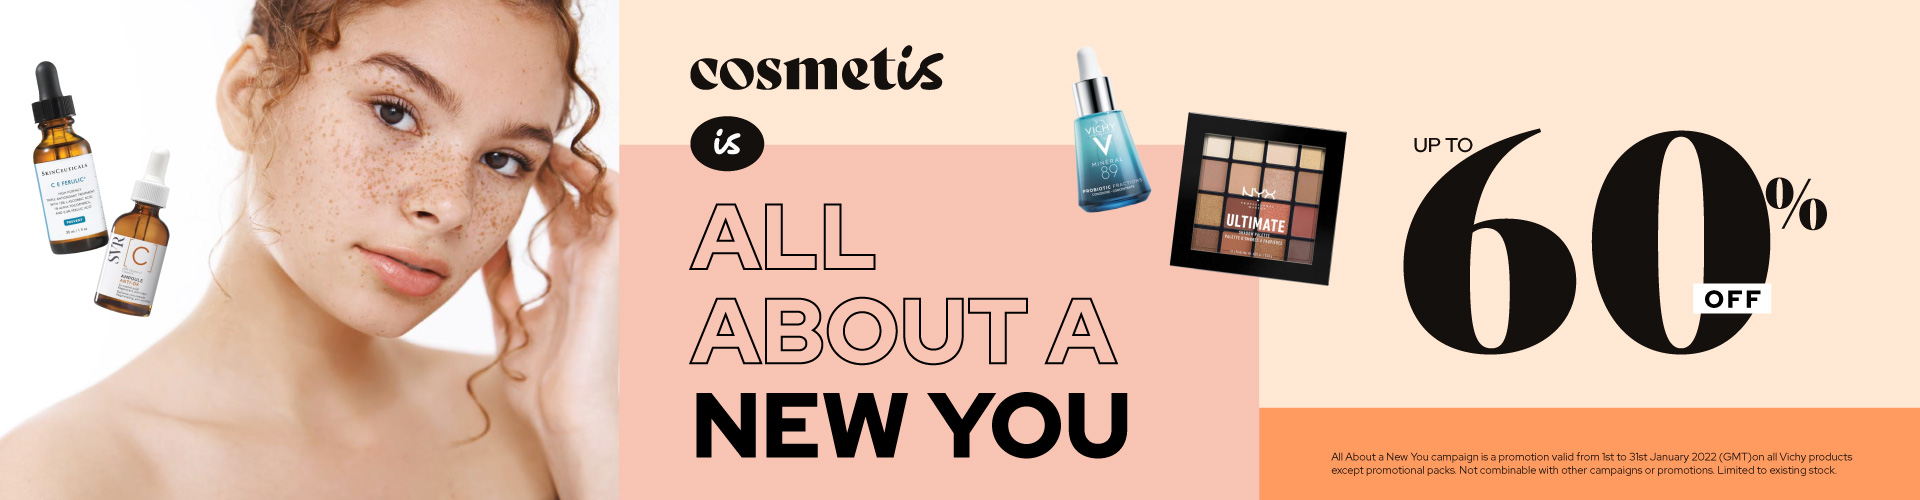 Cosmetis is All About A New You